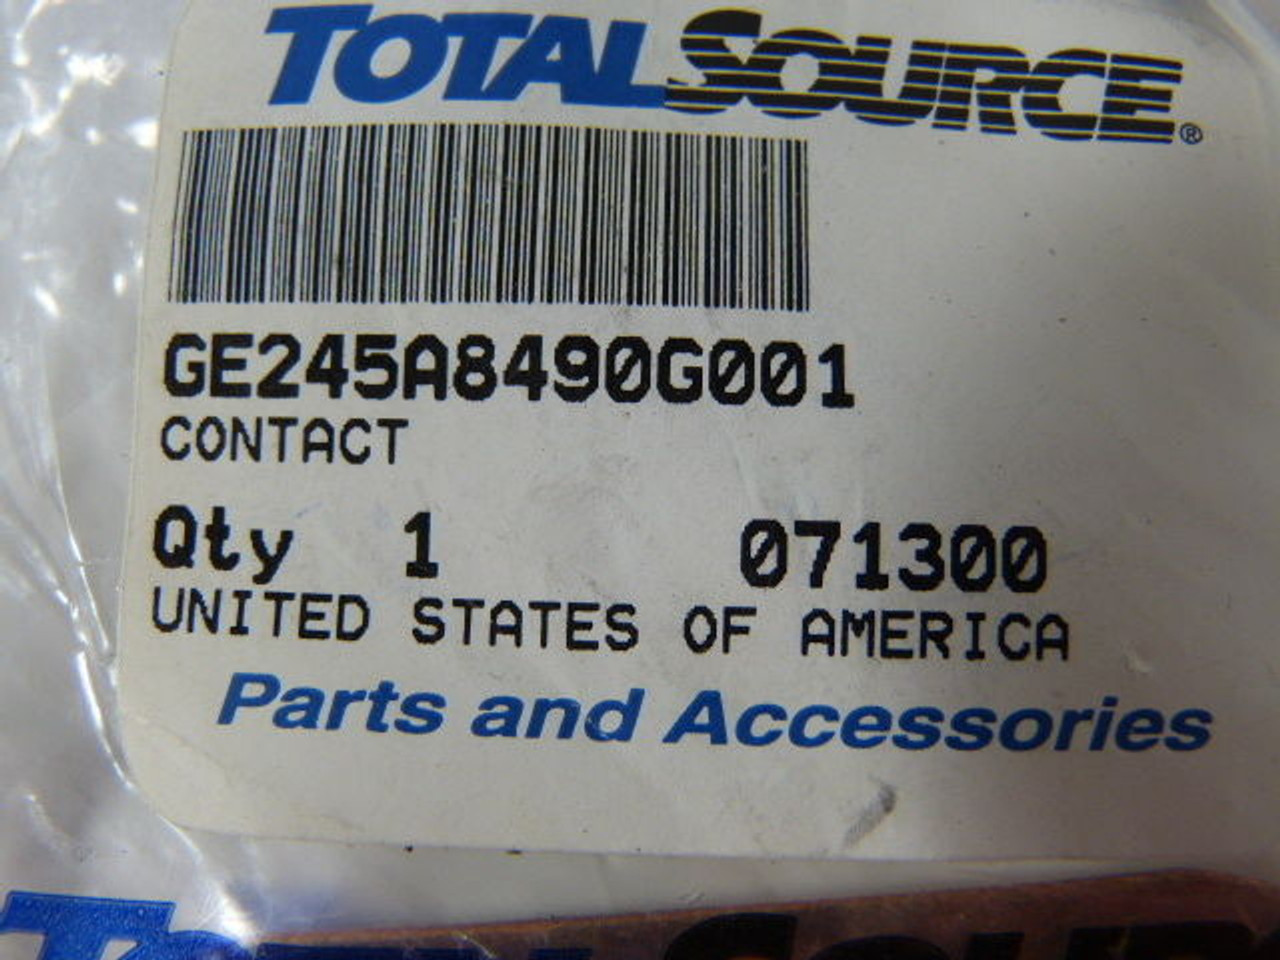 Total Source GE245A8490G001 Contact ! NEW !